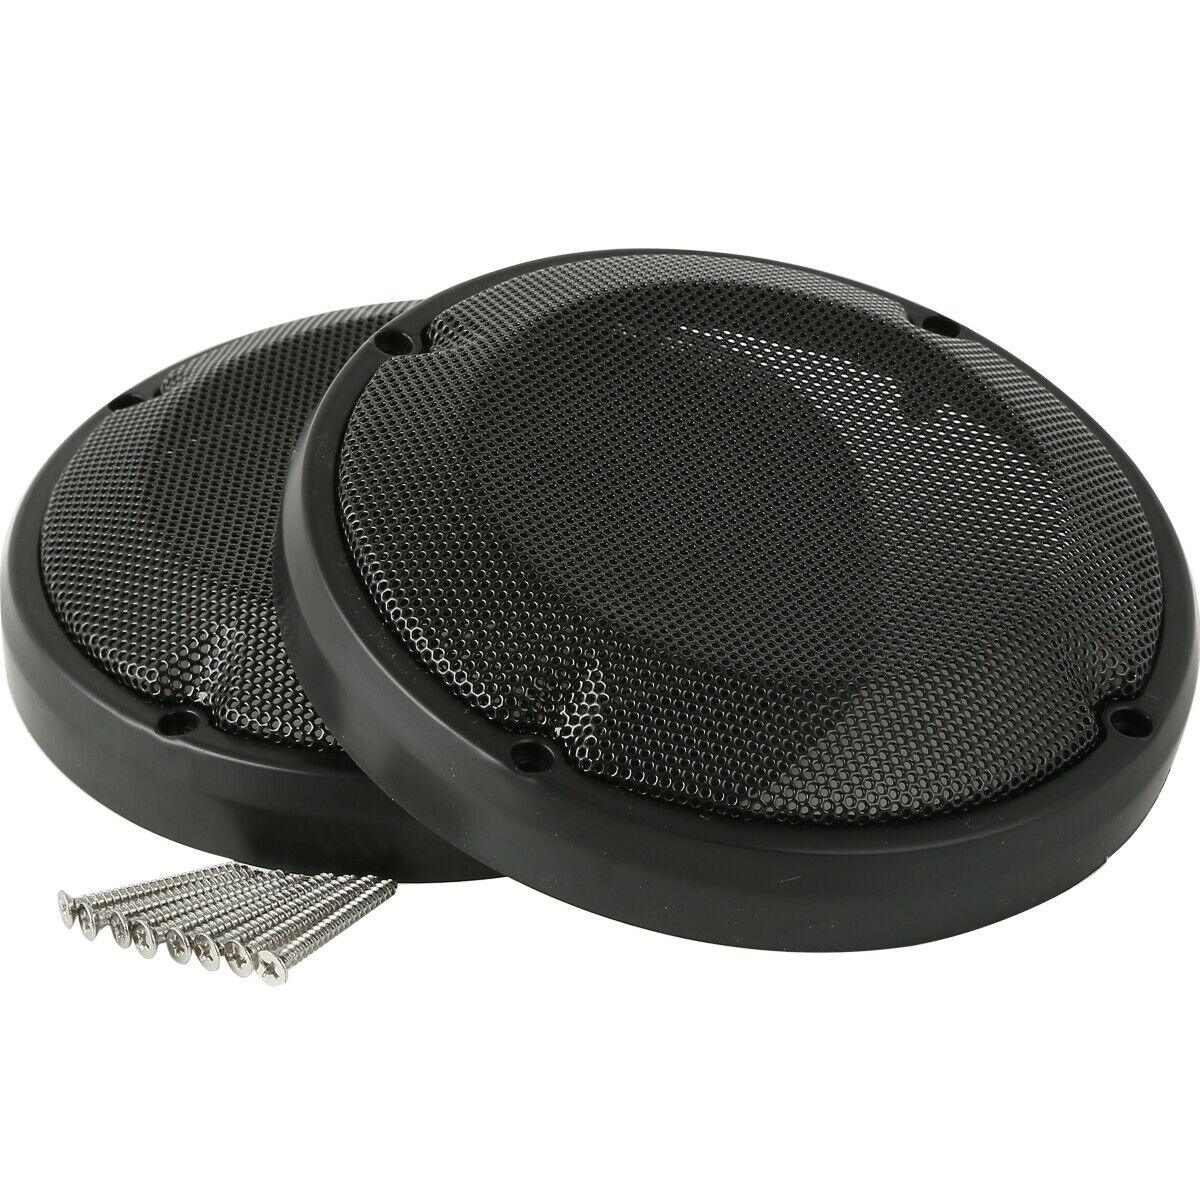 6.5" Saddlebag Lid Speaker Grills Covers Screws Fit For Harley Touring 83-22 18 - Moto Life Products